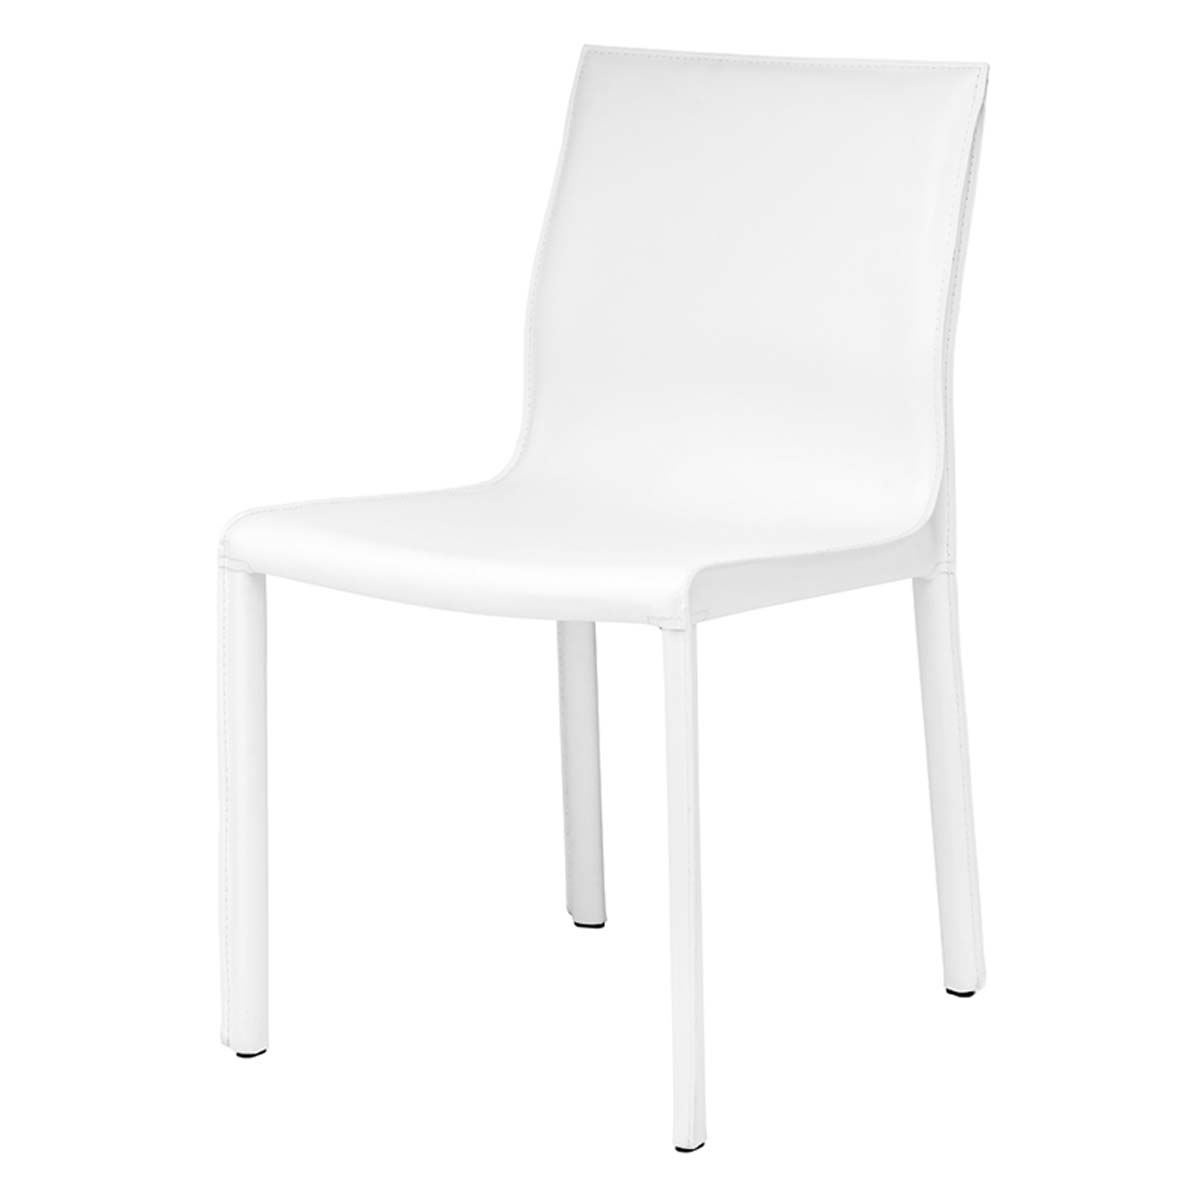 Nuevo Colter Leather Armless Dining Chair - White